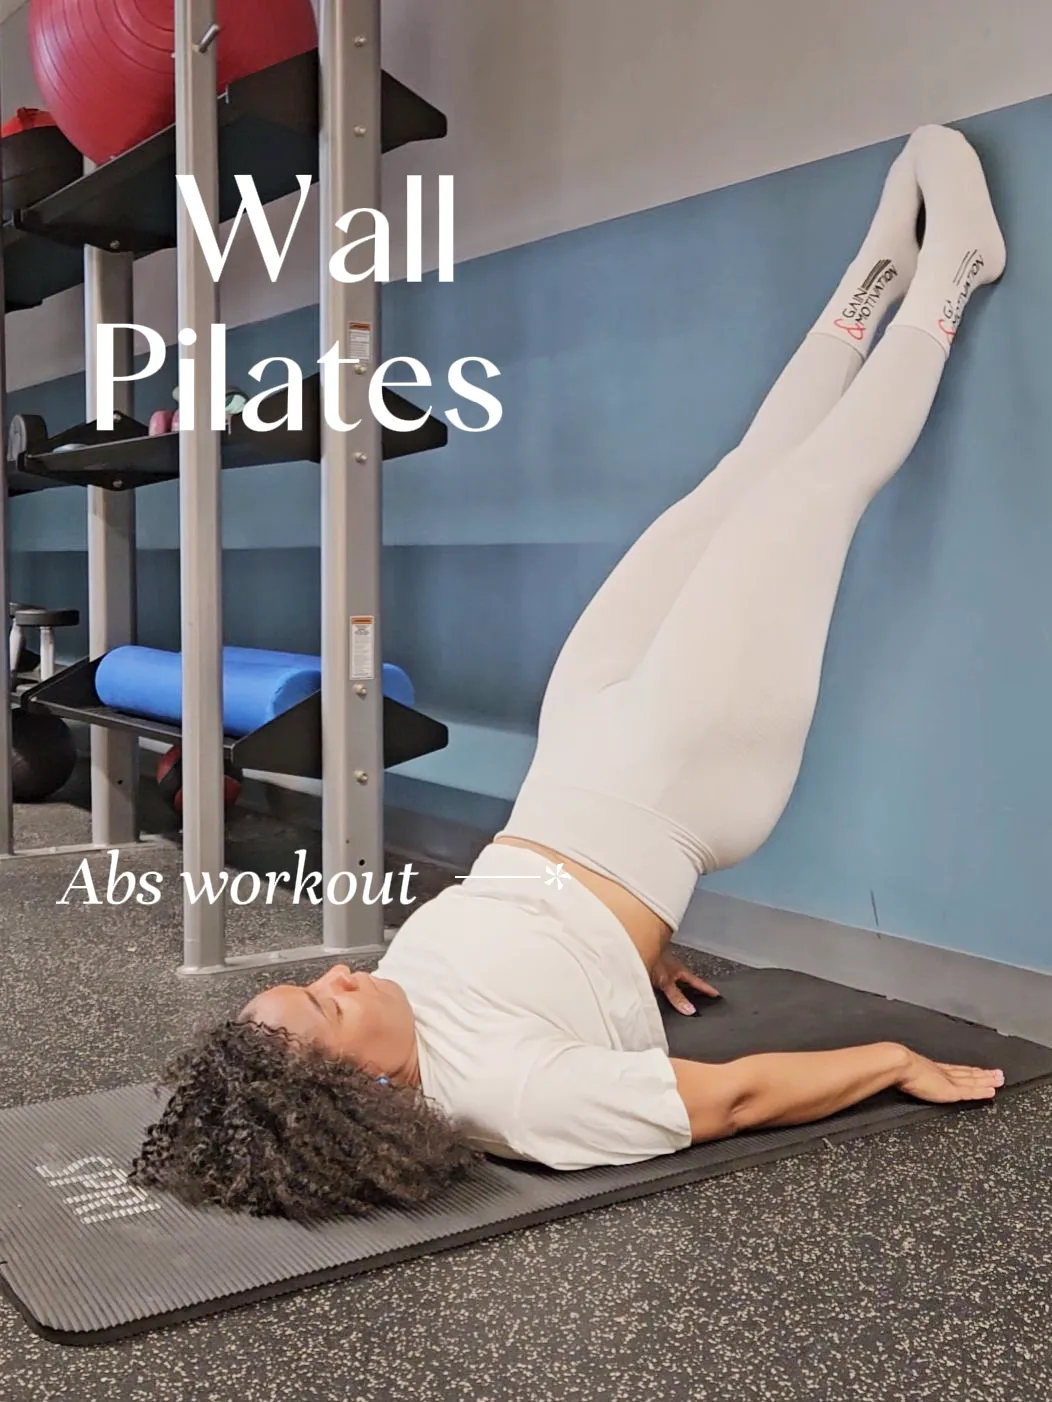 Why Is Wall Pilates So Effective? - BetterMe